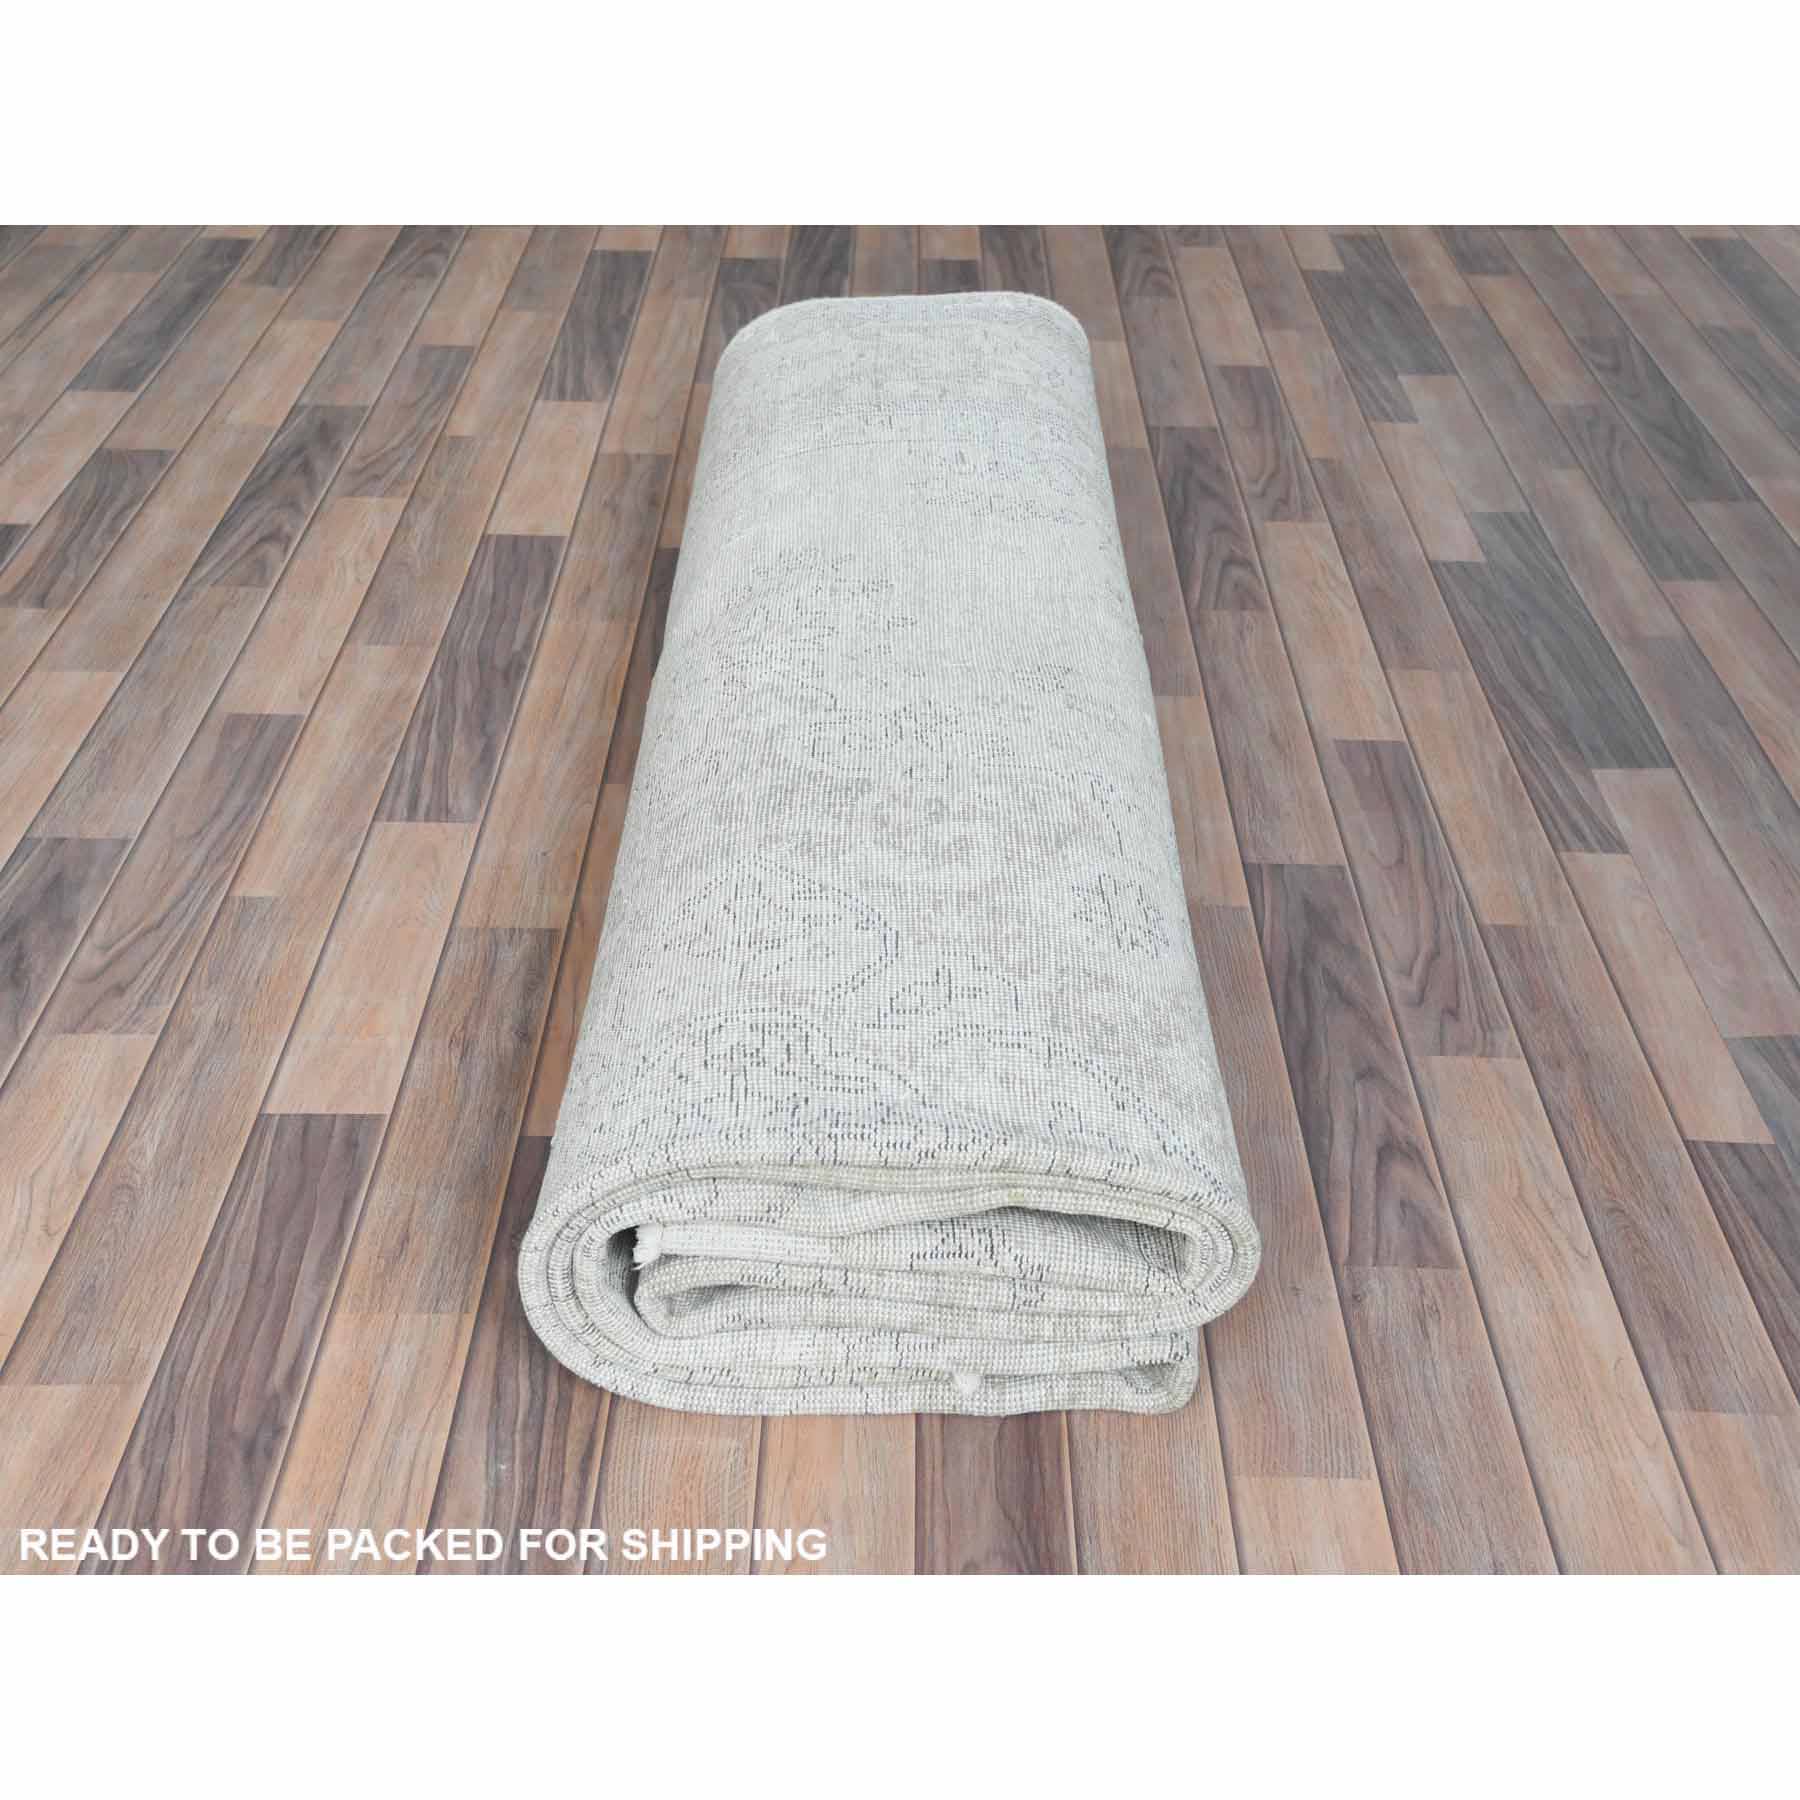 Overdyed-Vintage-Hand-Knotted-Rug-408460